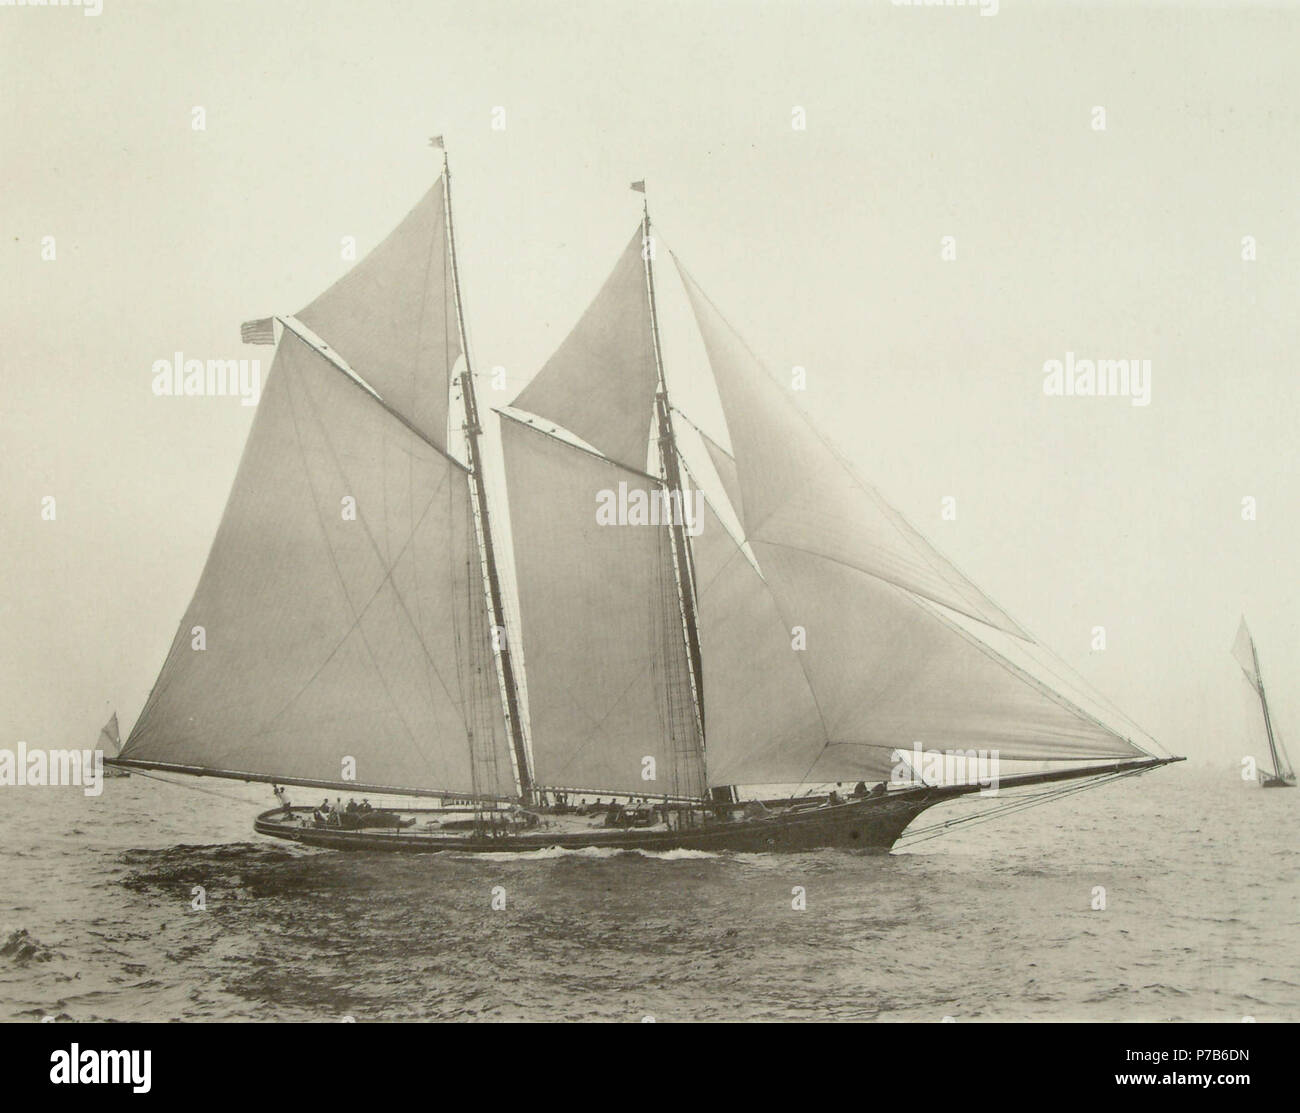 English: the yankee schooner America won the 1851 RYS £100 Cup for a New York Yacht Club syndicate. She was designed by George Steers, built at Henry H. Brown's shipyard in Brooklyn in 1851, and is shown here in a 1887 photograph by Nanthaniel Livermore Stebbins) which has served on a book cover: 'America's Victory' (David W. Shaw, Free Press 2002) Note that this is not America's rig as that with which she won the £100 Cup in 1851: Donald McKay and Edward Burgess refitted her in 1875 and 1885 respectively. By 1887, the rake in her masts was reduced, all her spars were lengthened, she featured  Stock Photo